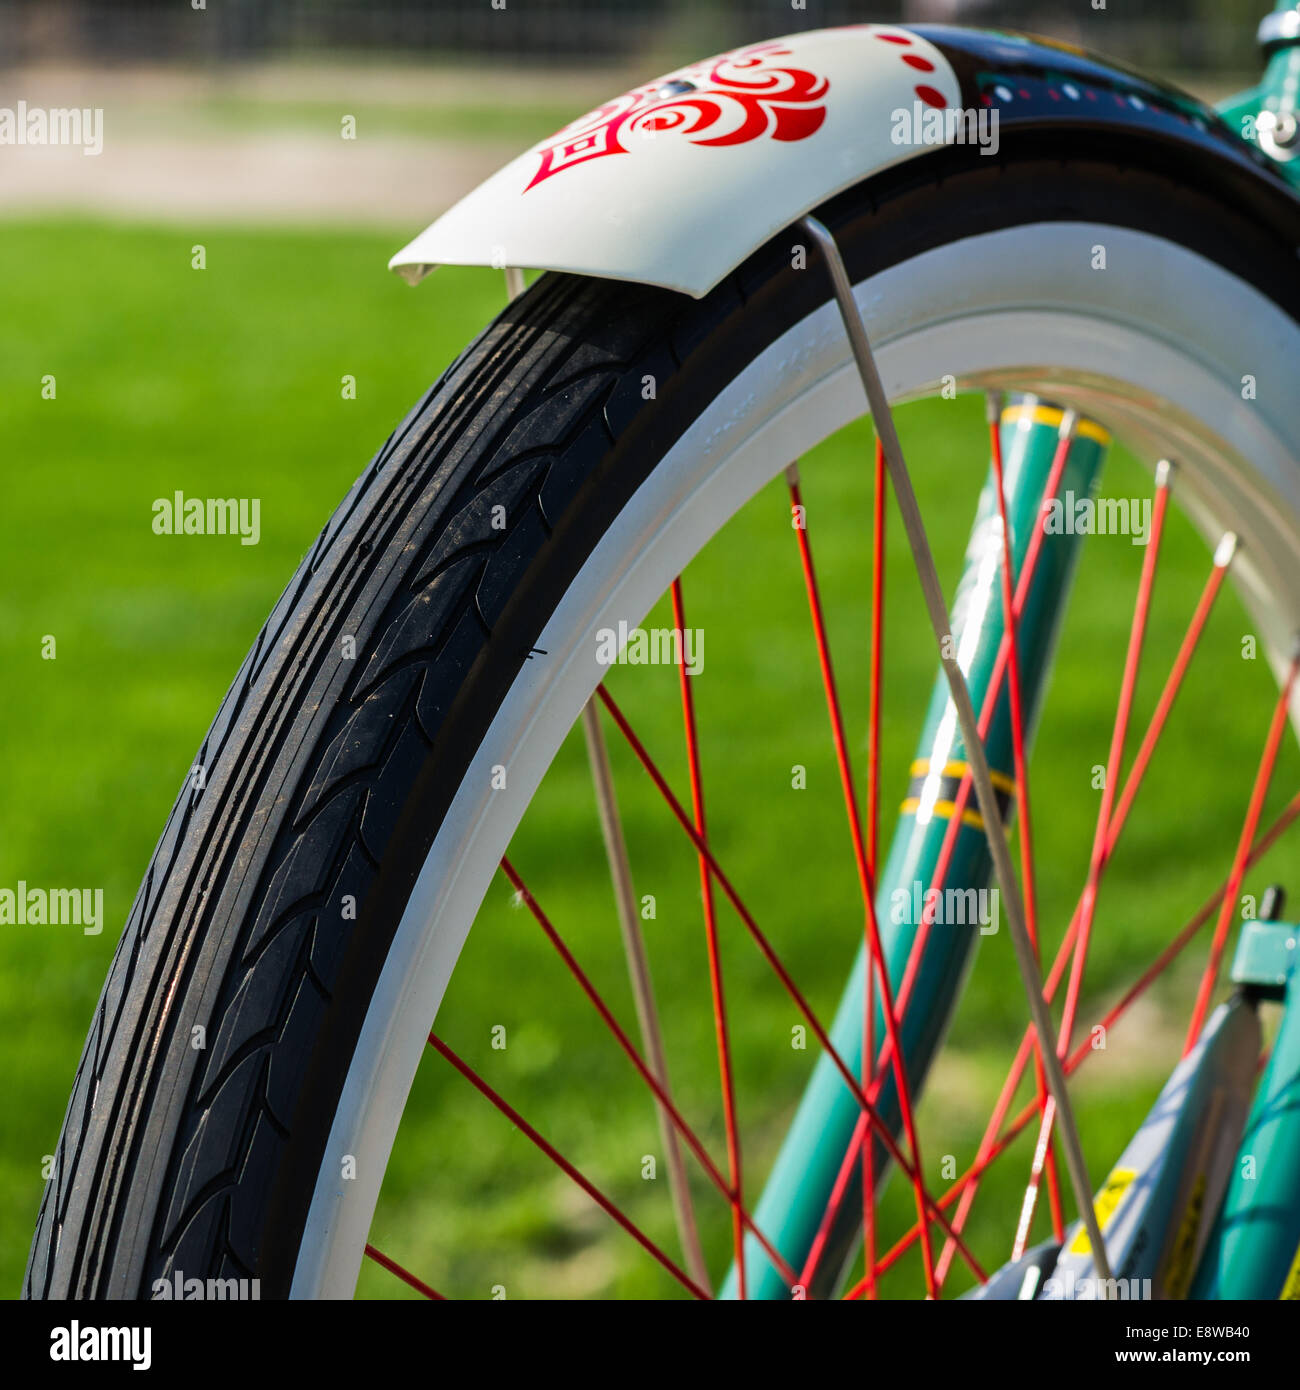 Closeup view of bicycle wheel against the green grass. Ready for the summer season Stock Photo